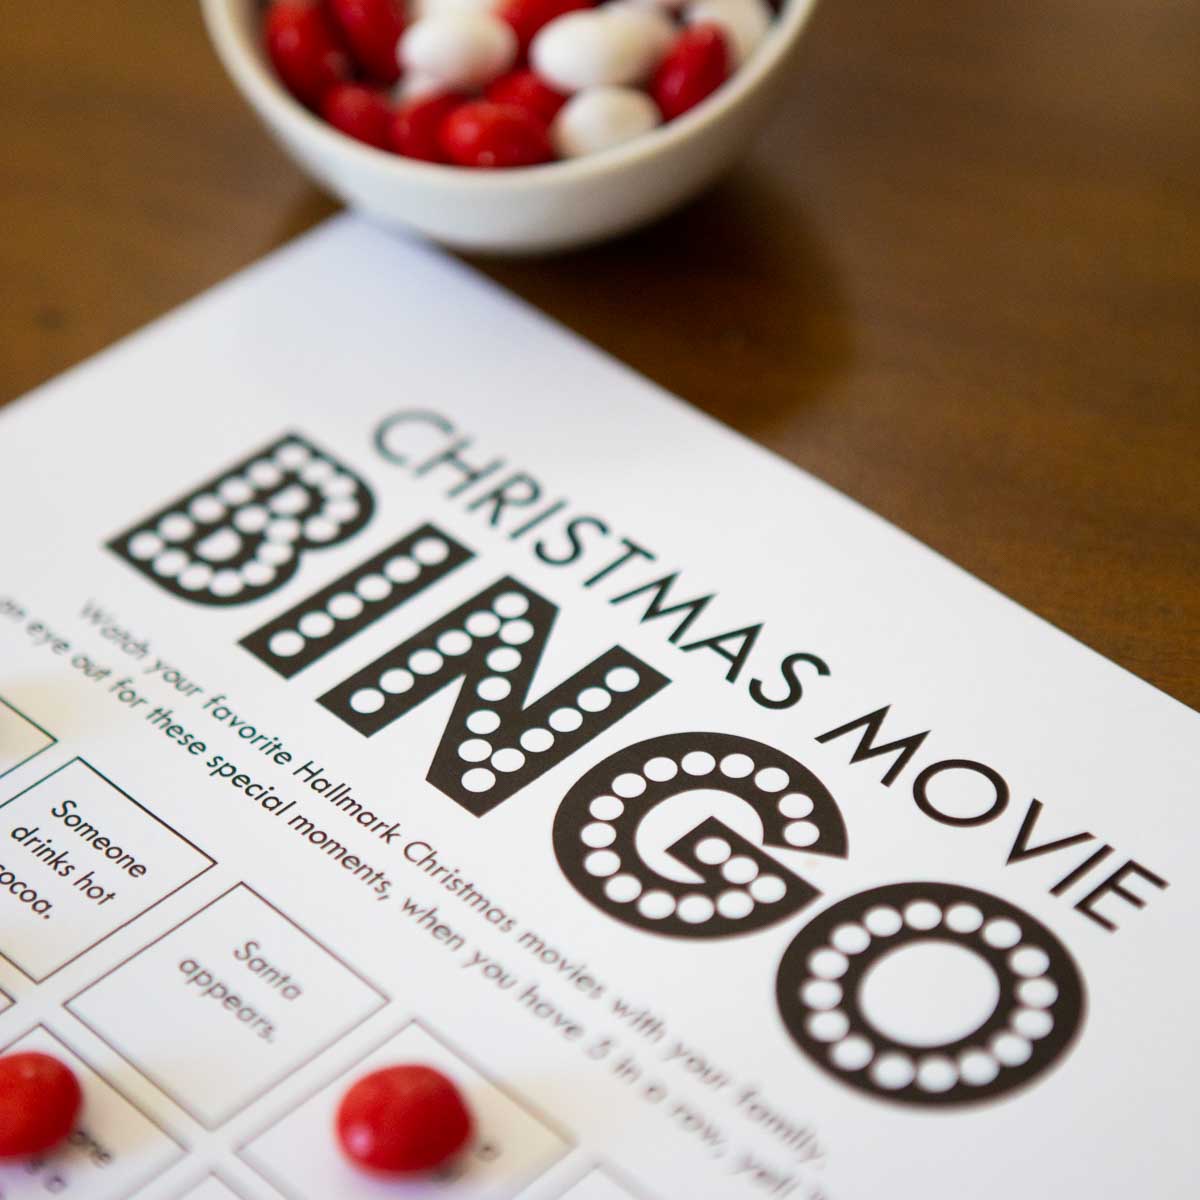 Christmas movie bingo game has red candy markers holding place.